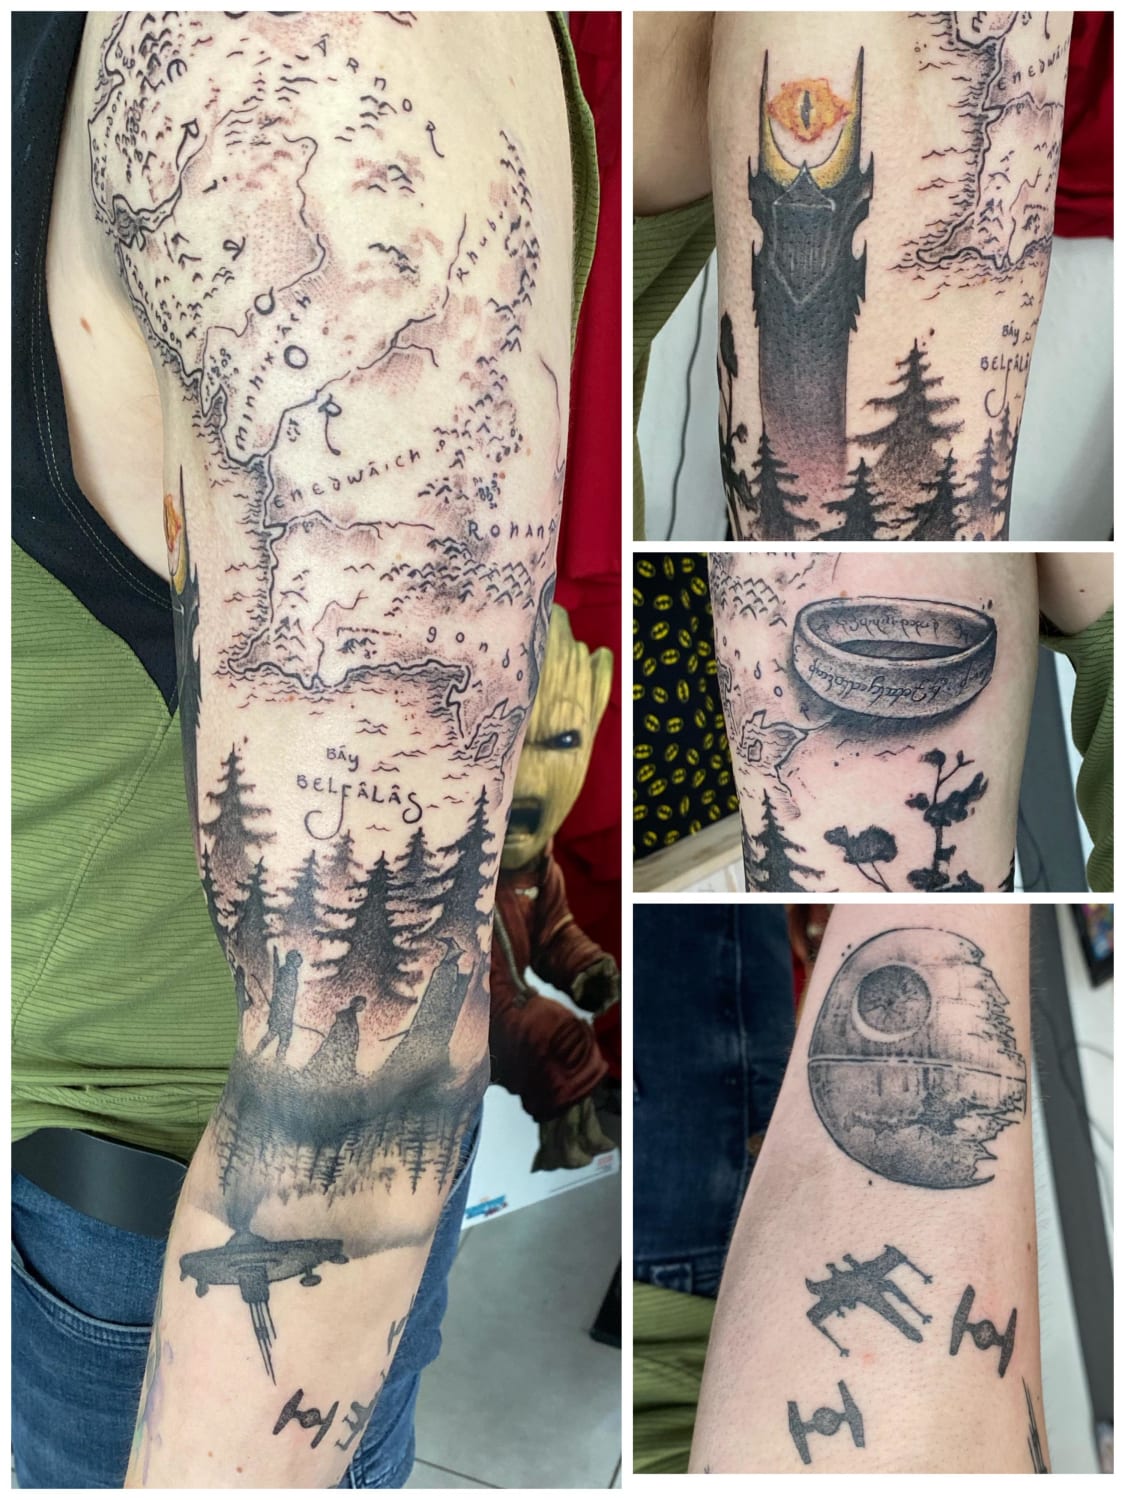 Lord of the rings and star wars Tattoo by Martin @smilink in Hannover, Germany